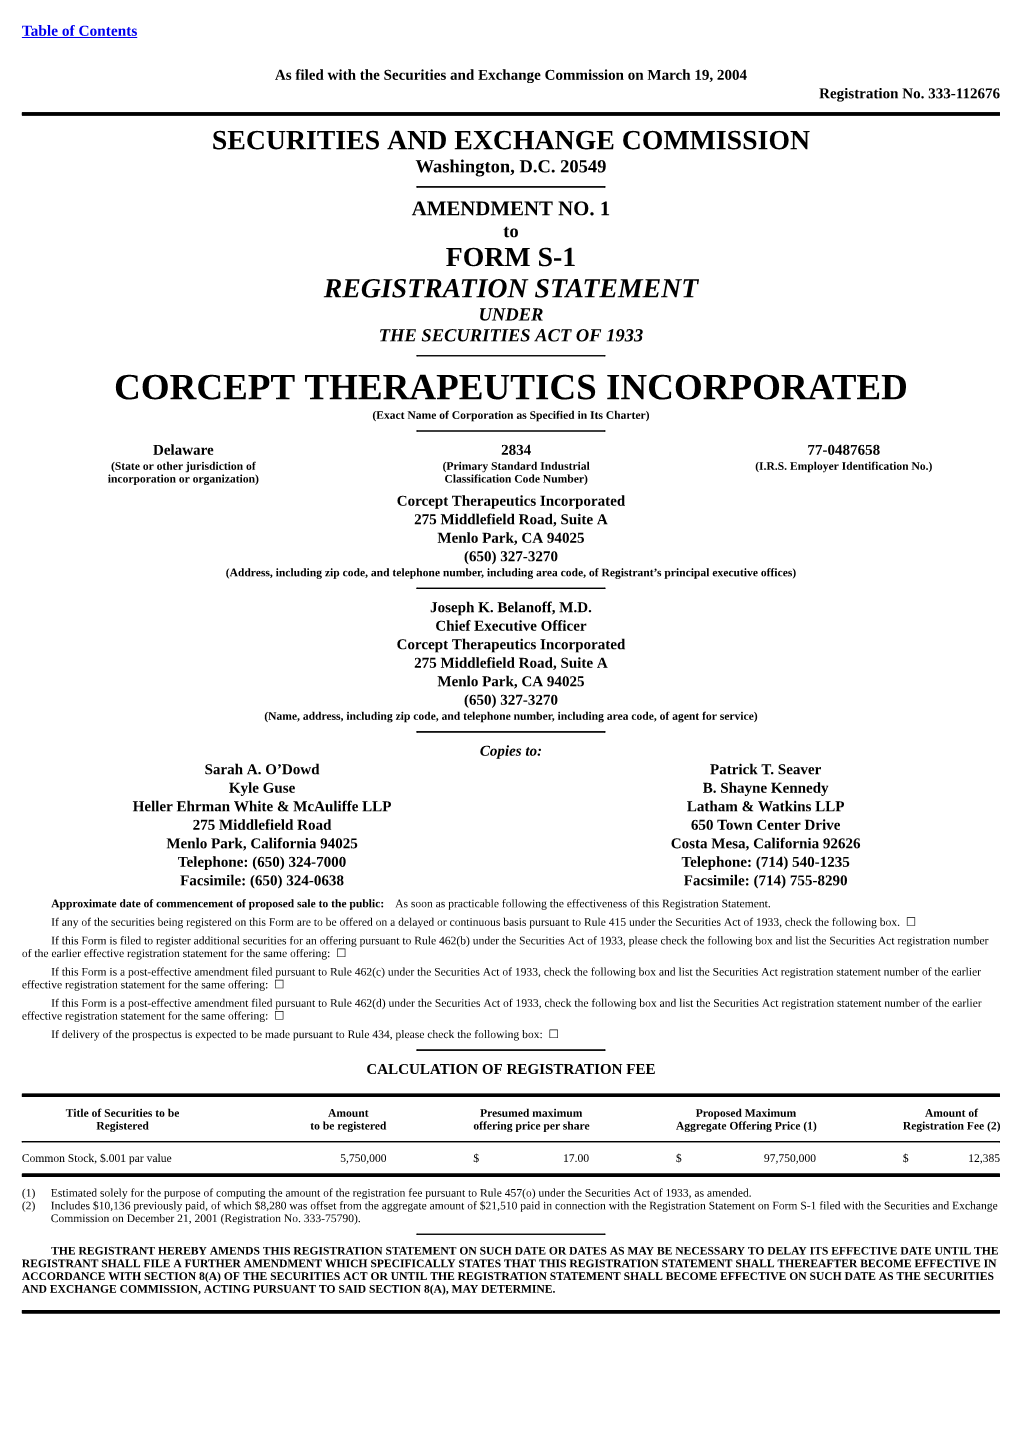 CORCEPT THERAPEUTICS INCORPORATED (Exact Name of Corporation As Specified in Its Charter)